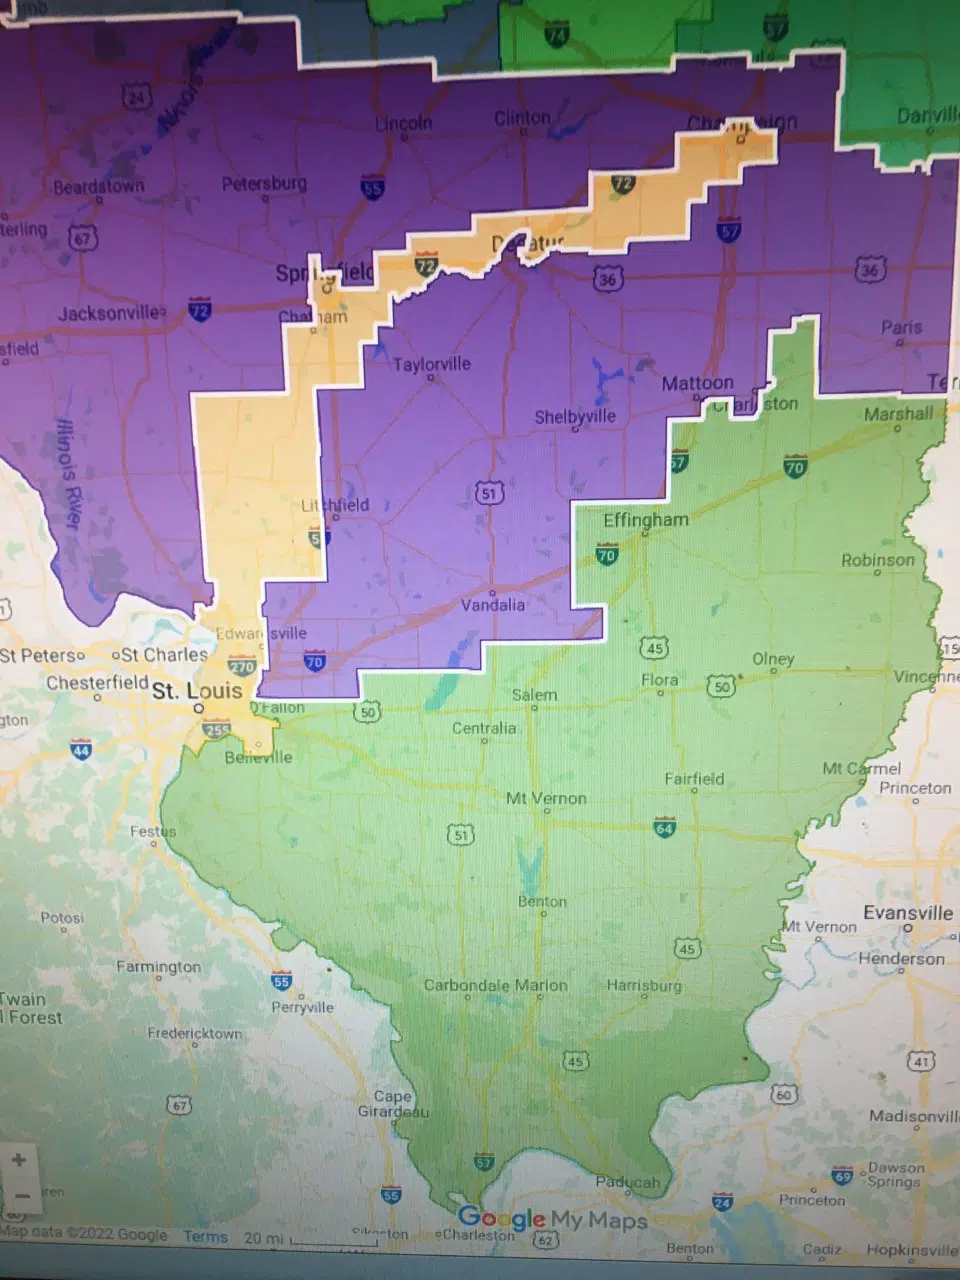 ILLINOIS’ NEW CONGRESSIONAL MAP / 15TH AND 12TH DISTRICT BOUNDARIES